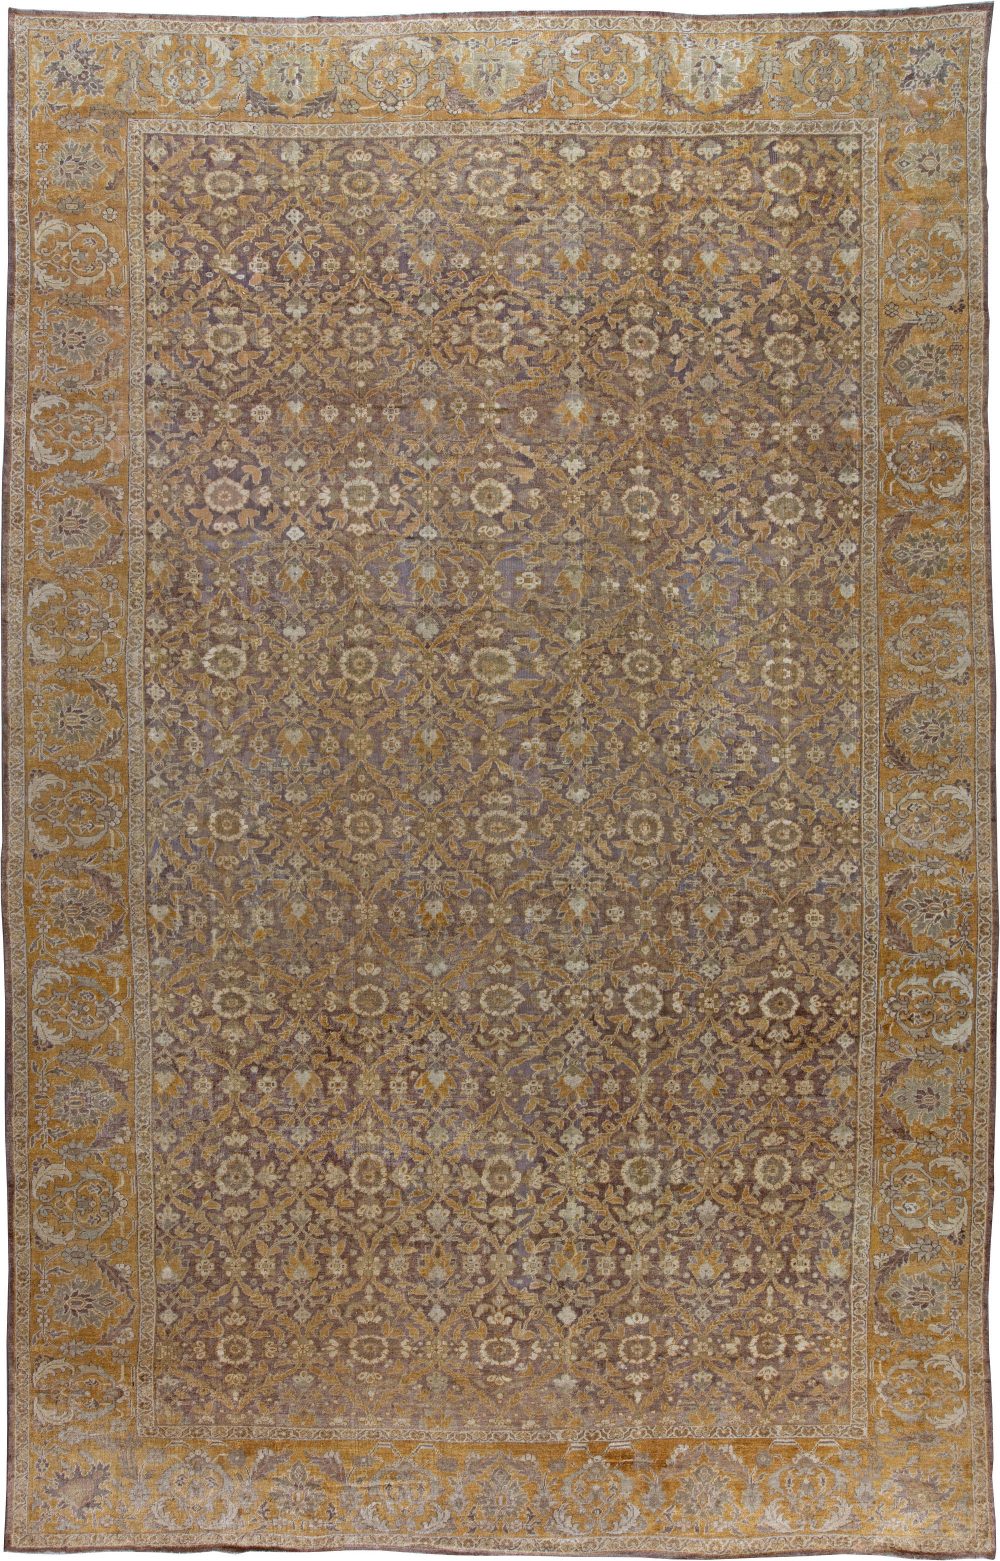 Antique Persian Sultanabad Rug BB4148